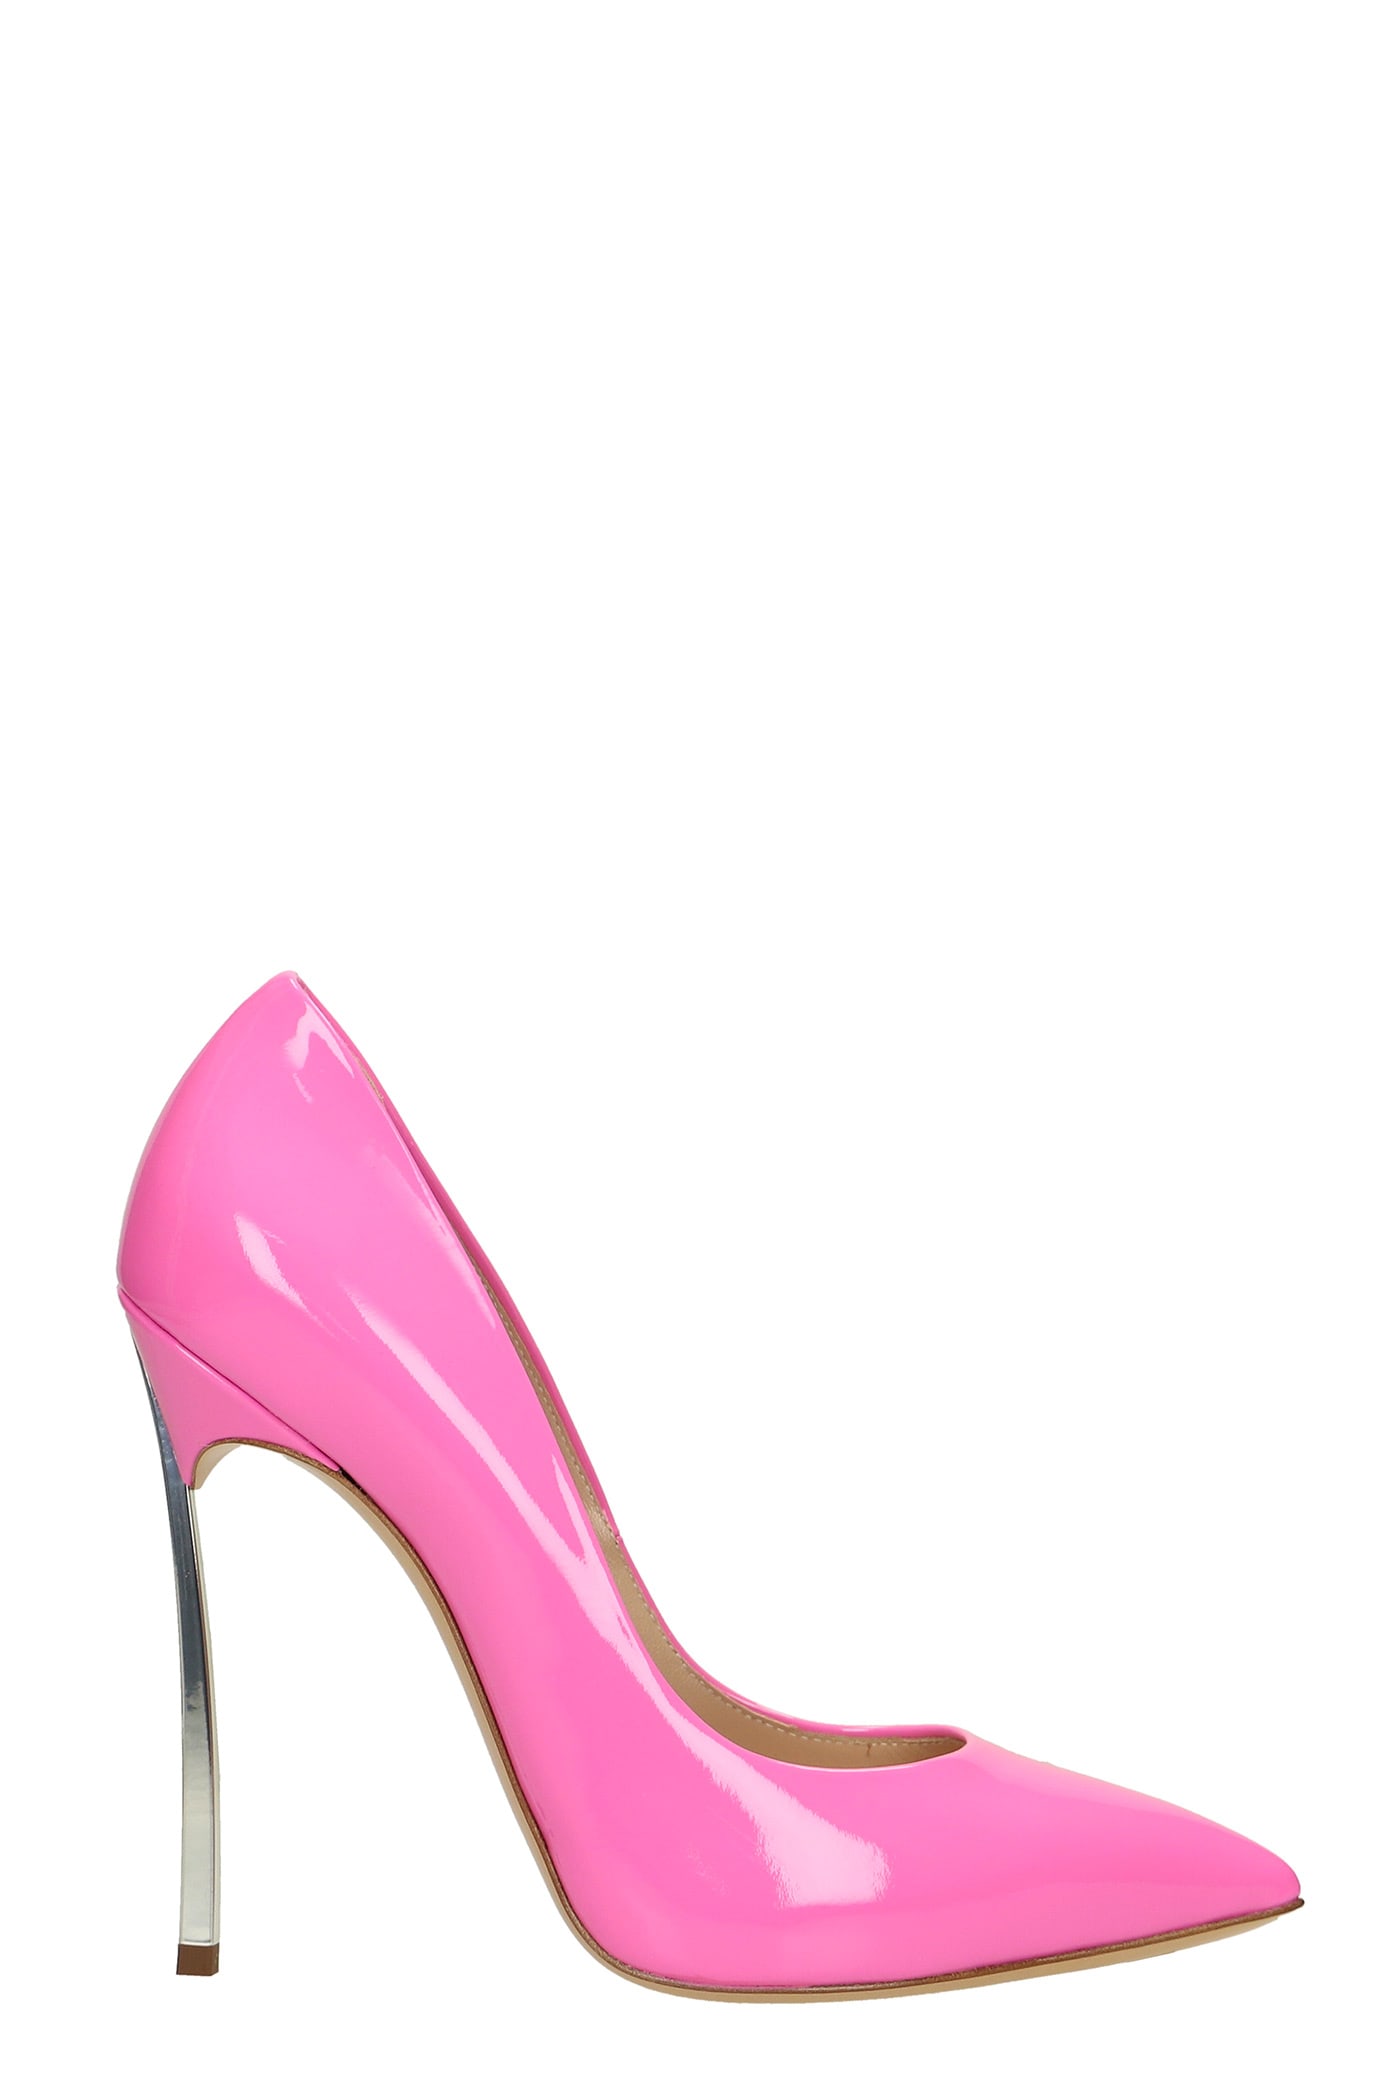 Casadei Pumps In Rose-pink Patent Leather